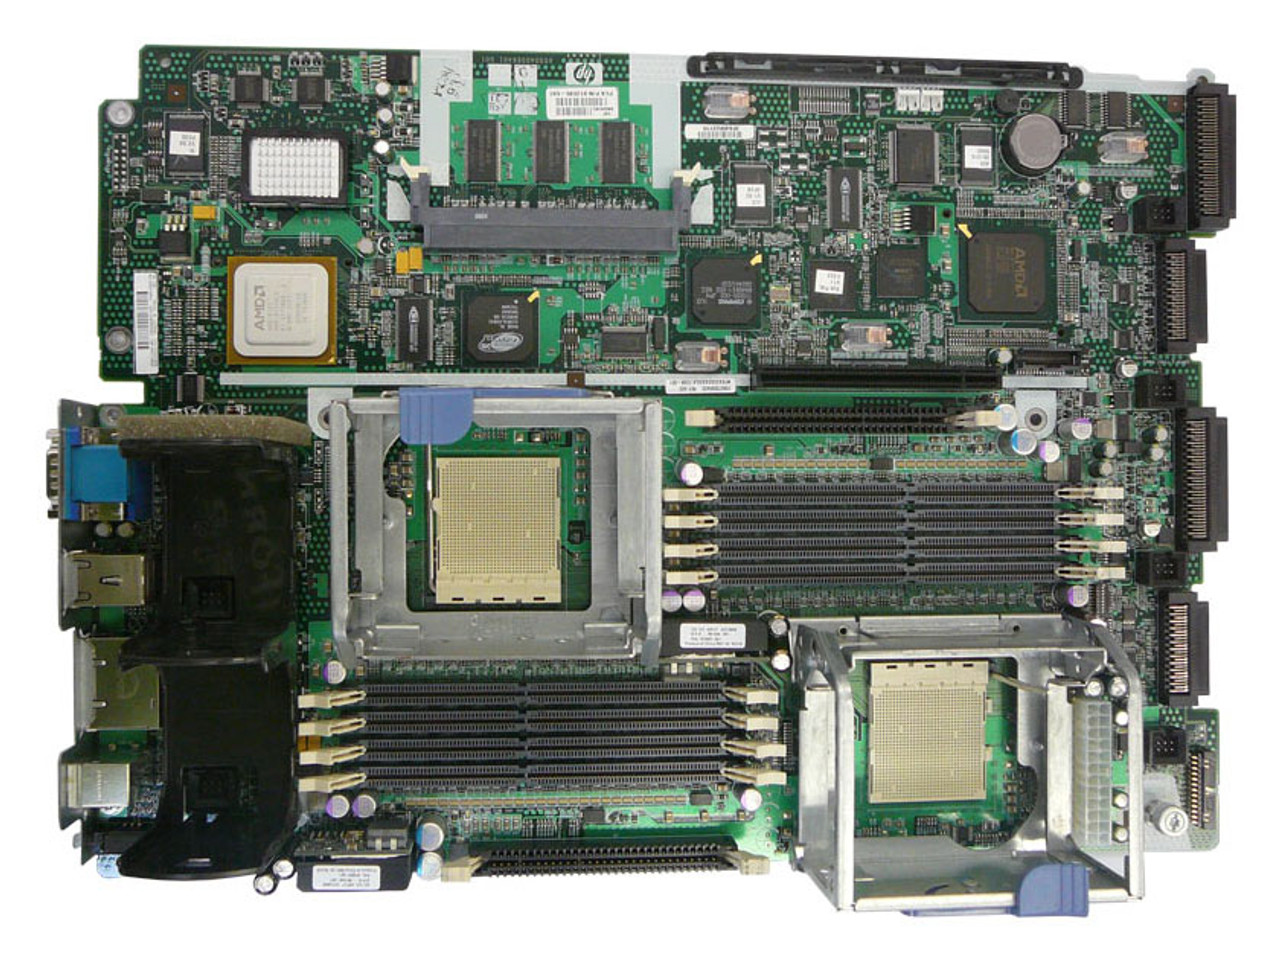 012585-001 - HP Main System Board (Motherboard) for HP ProLiant DL385 G1/G2 Server